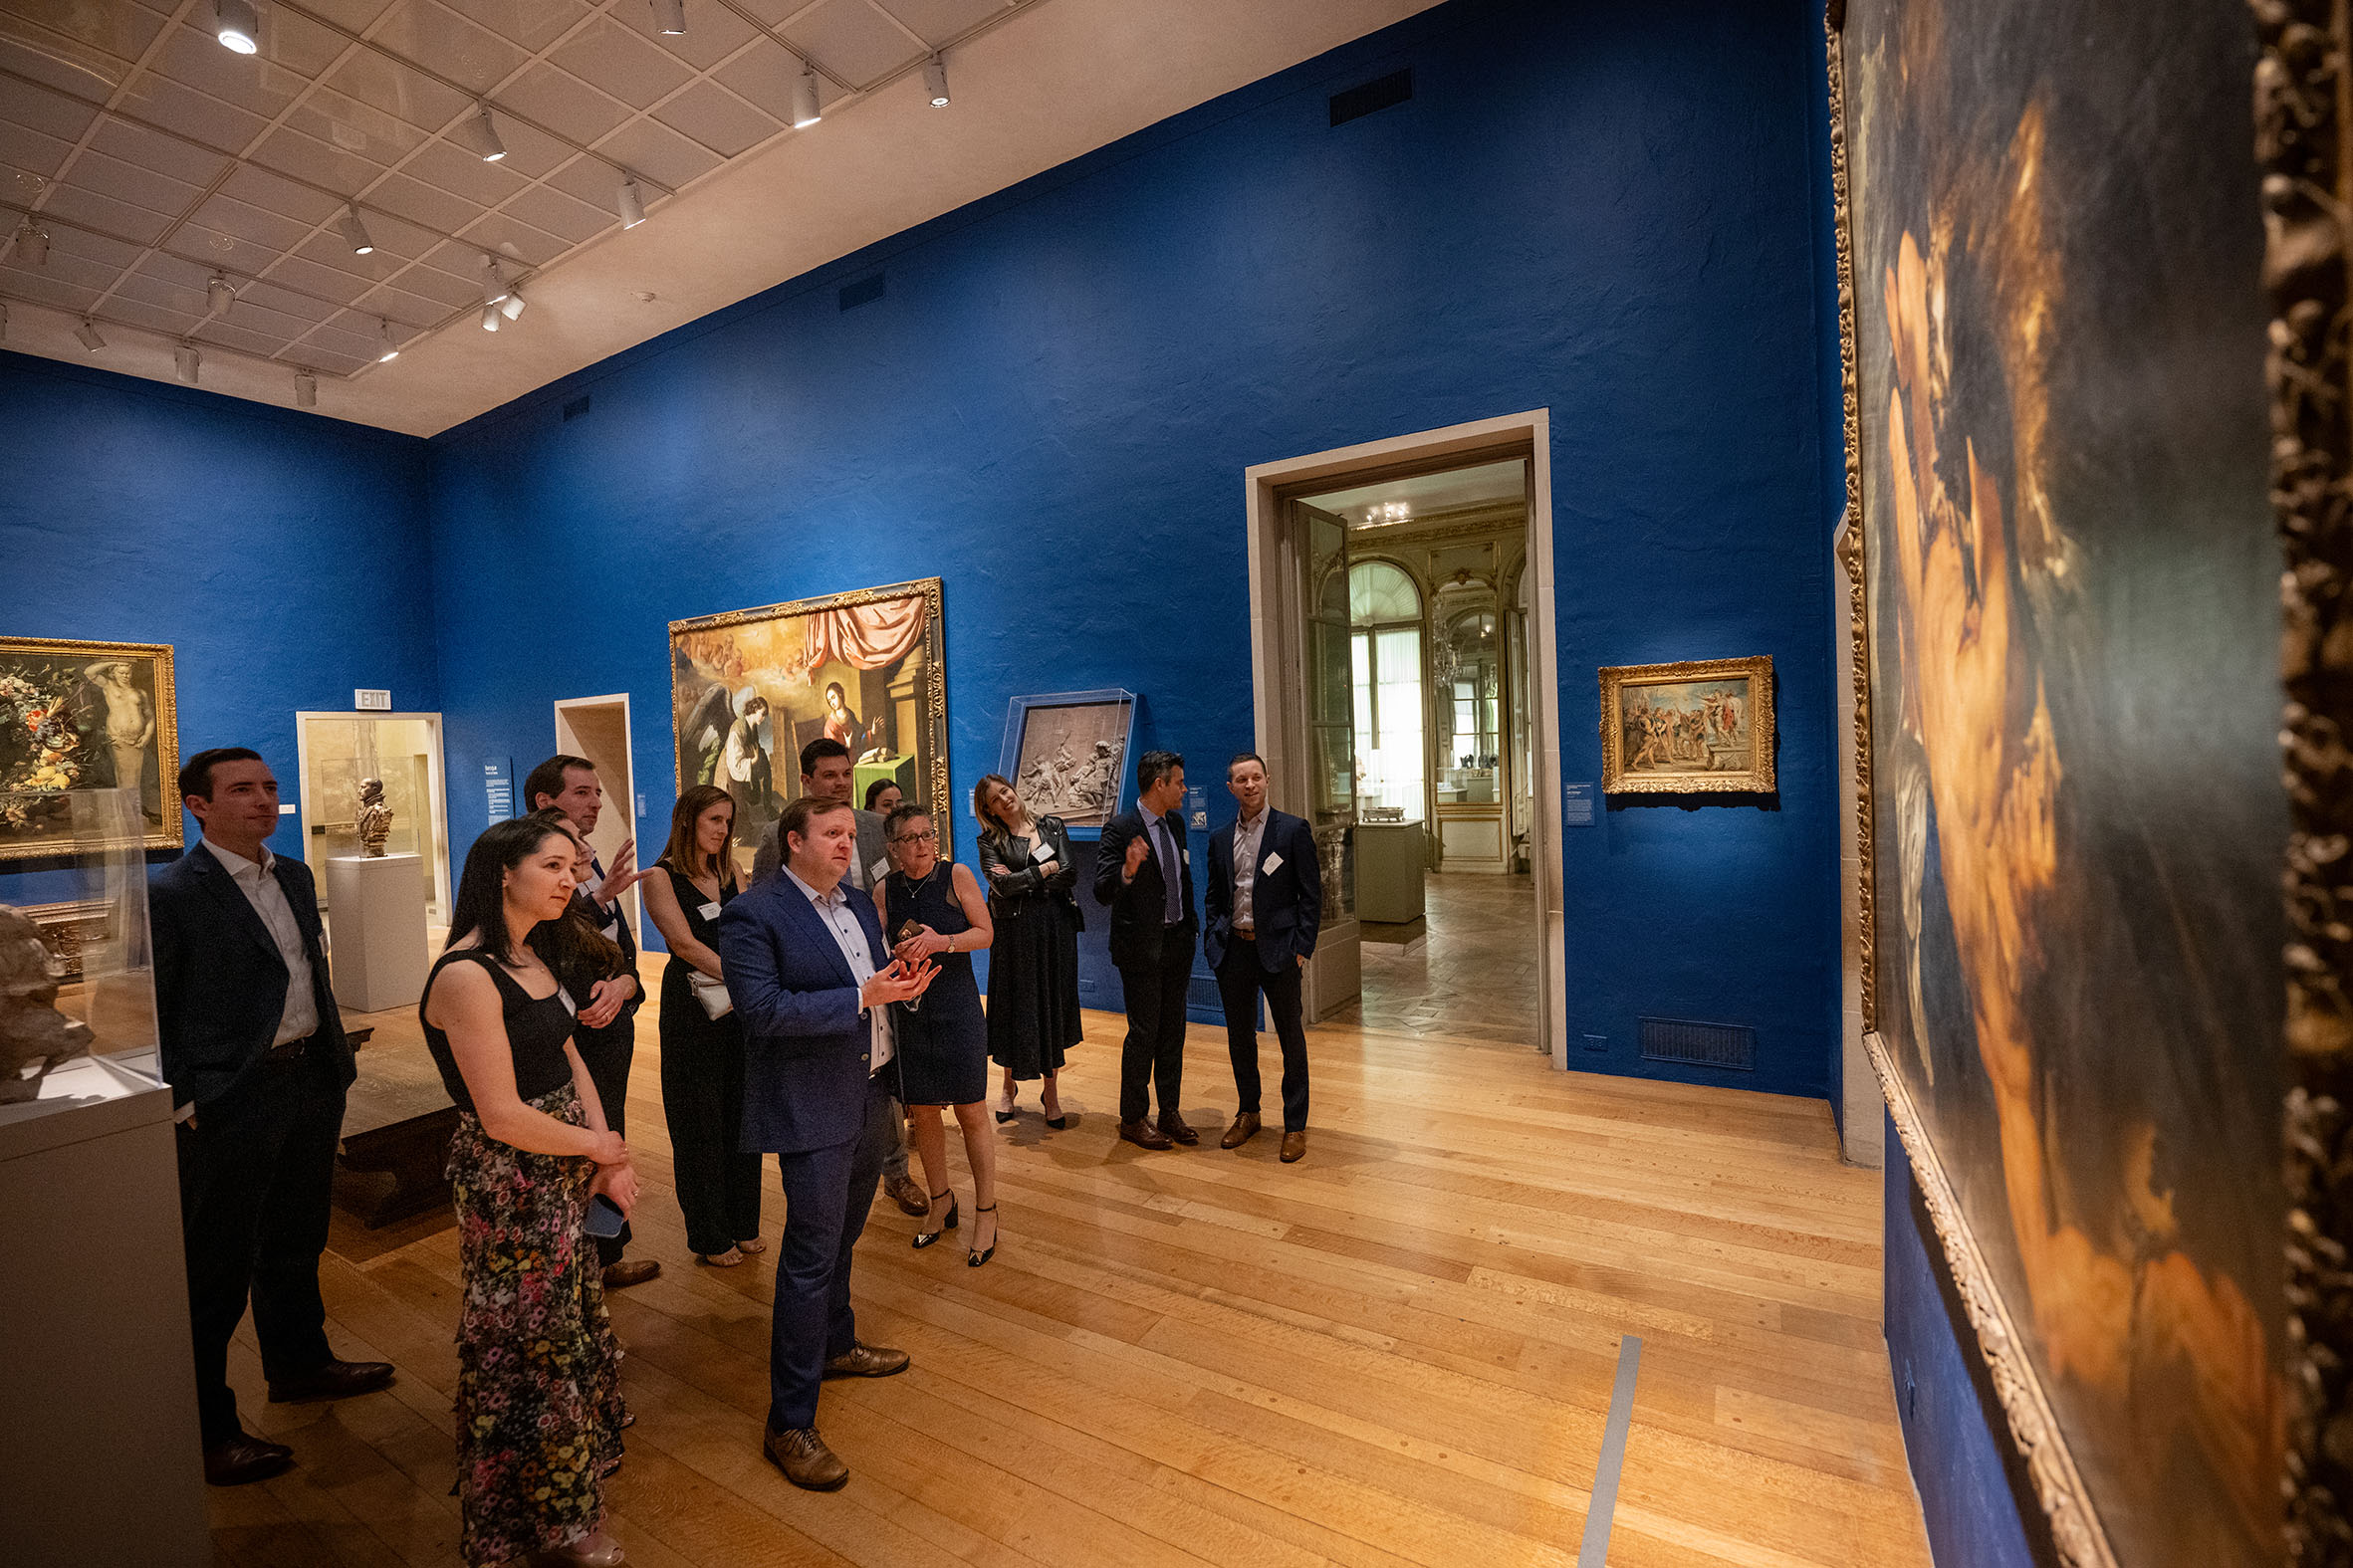 Group of people looking at art paintings on the walls